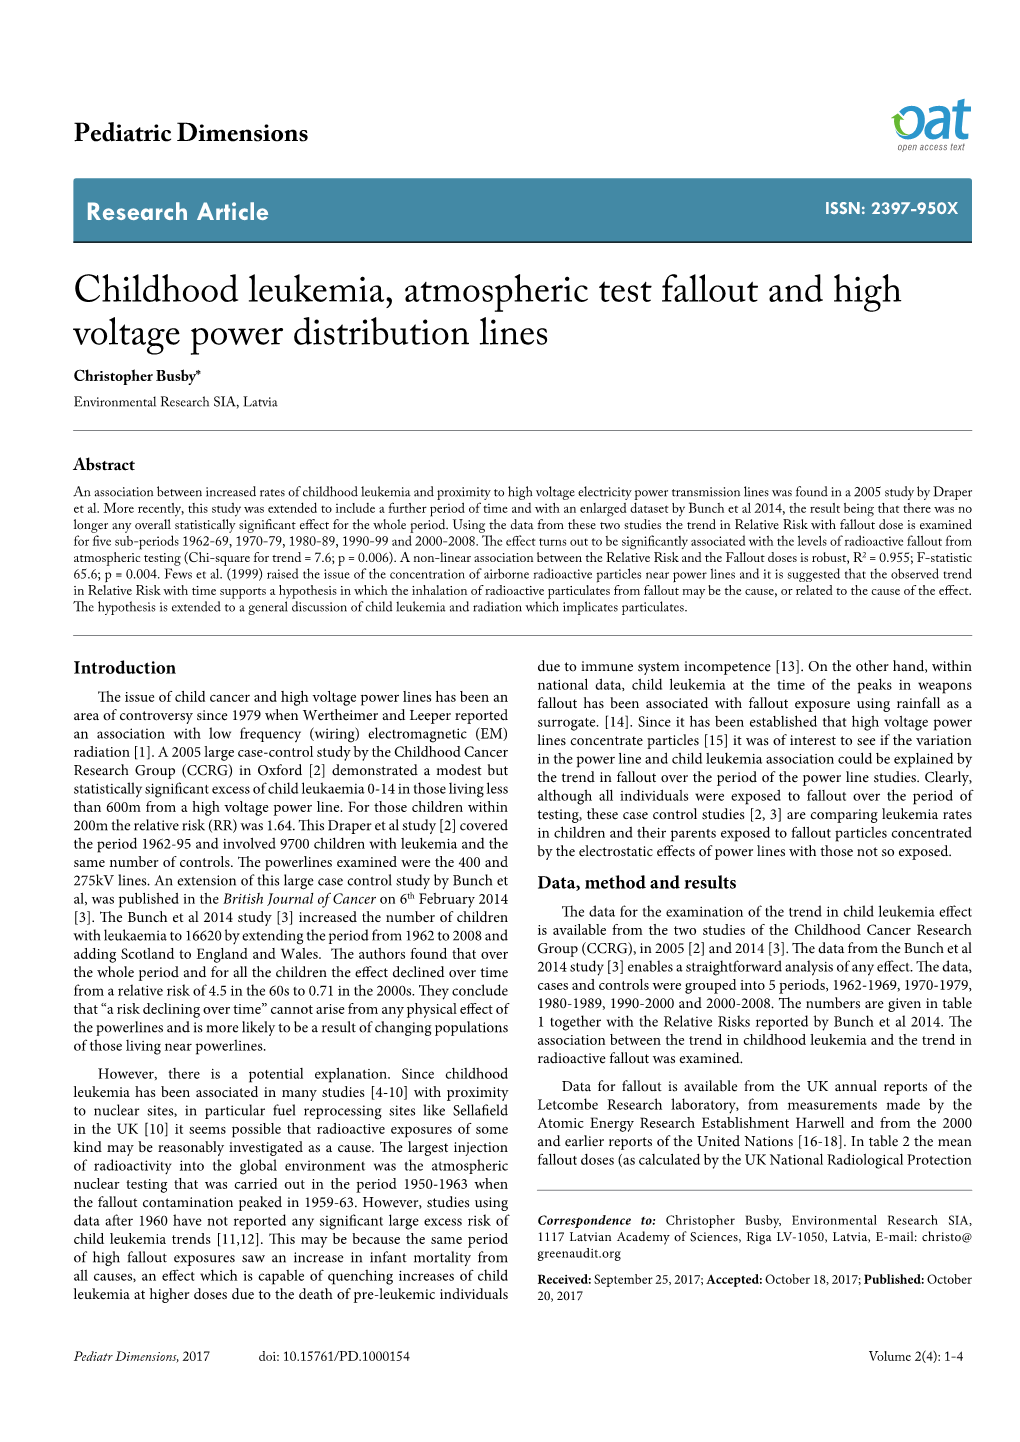 Childhood Leukemia, Atmospheric Test Fallout and High Voltage Power Distribution Lines Christopher Busby* Environmental Research SIA, Latvia